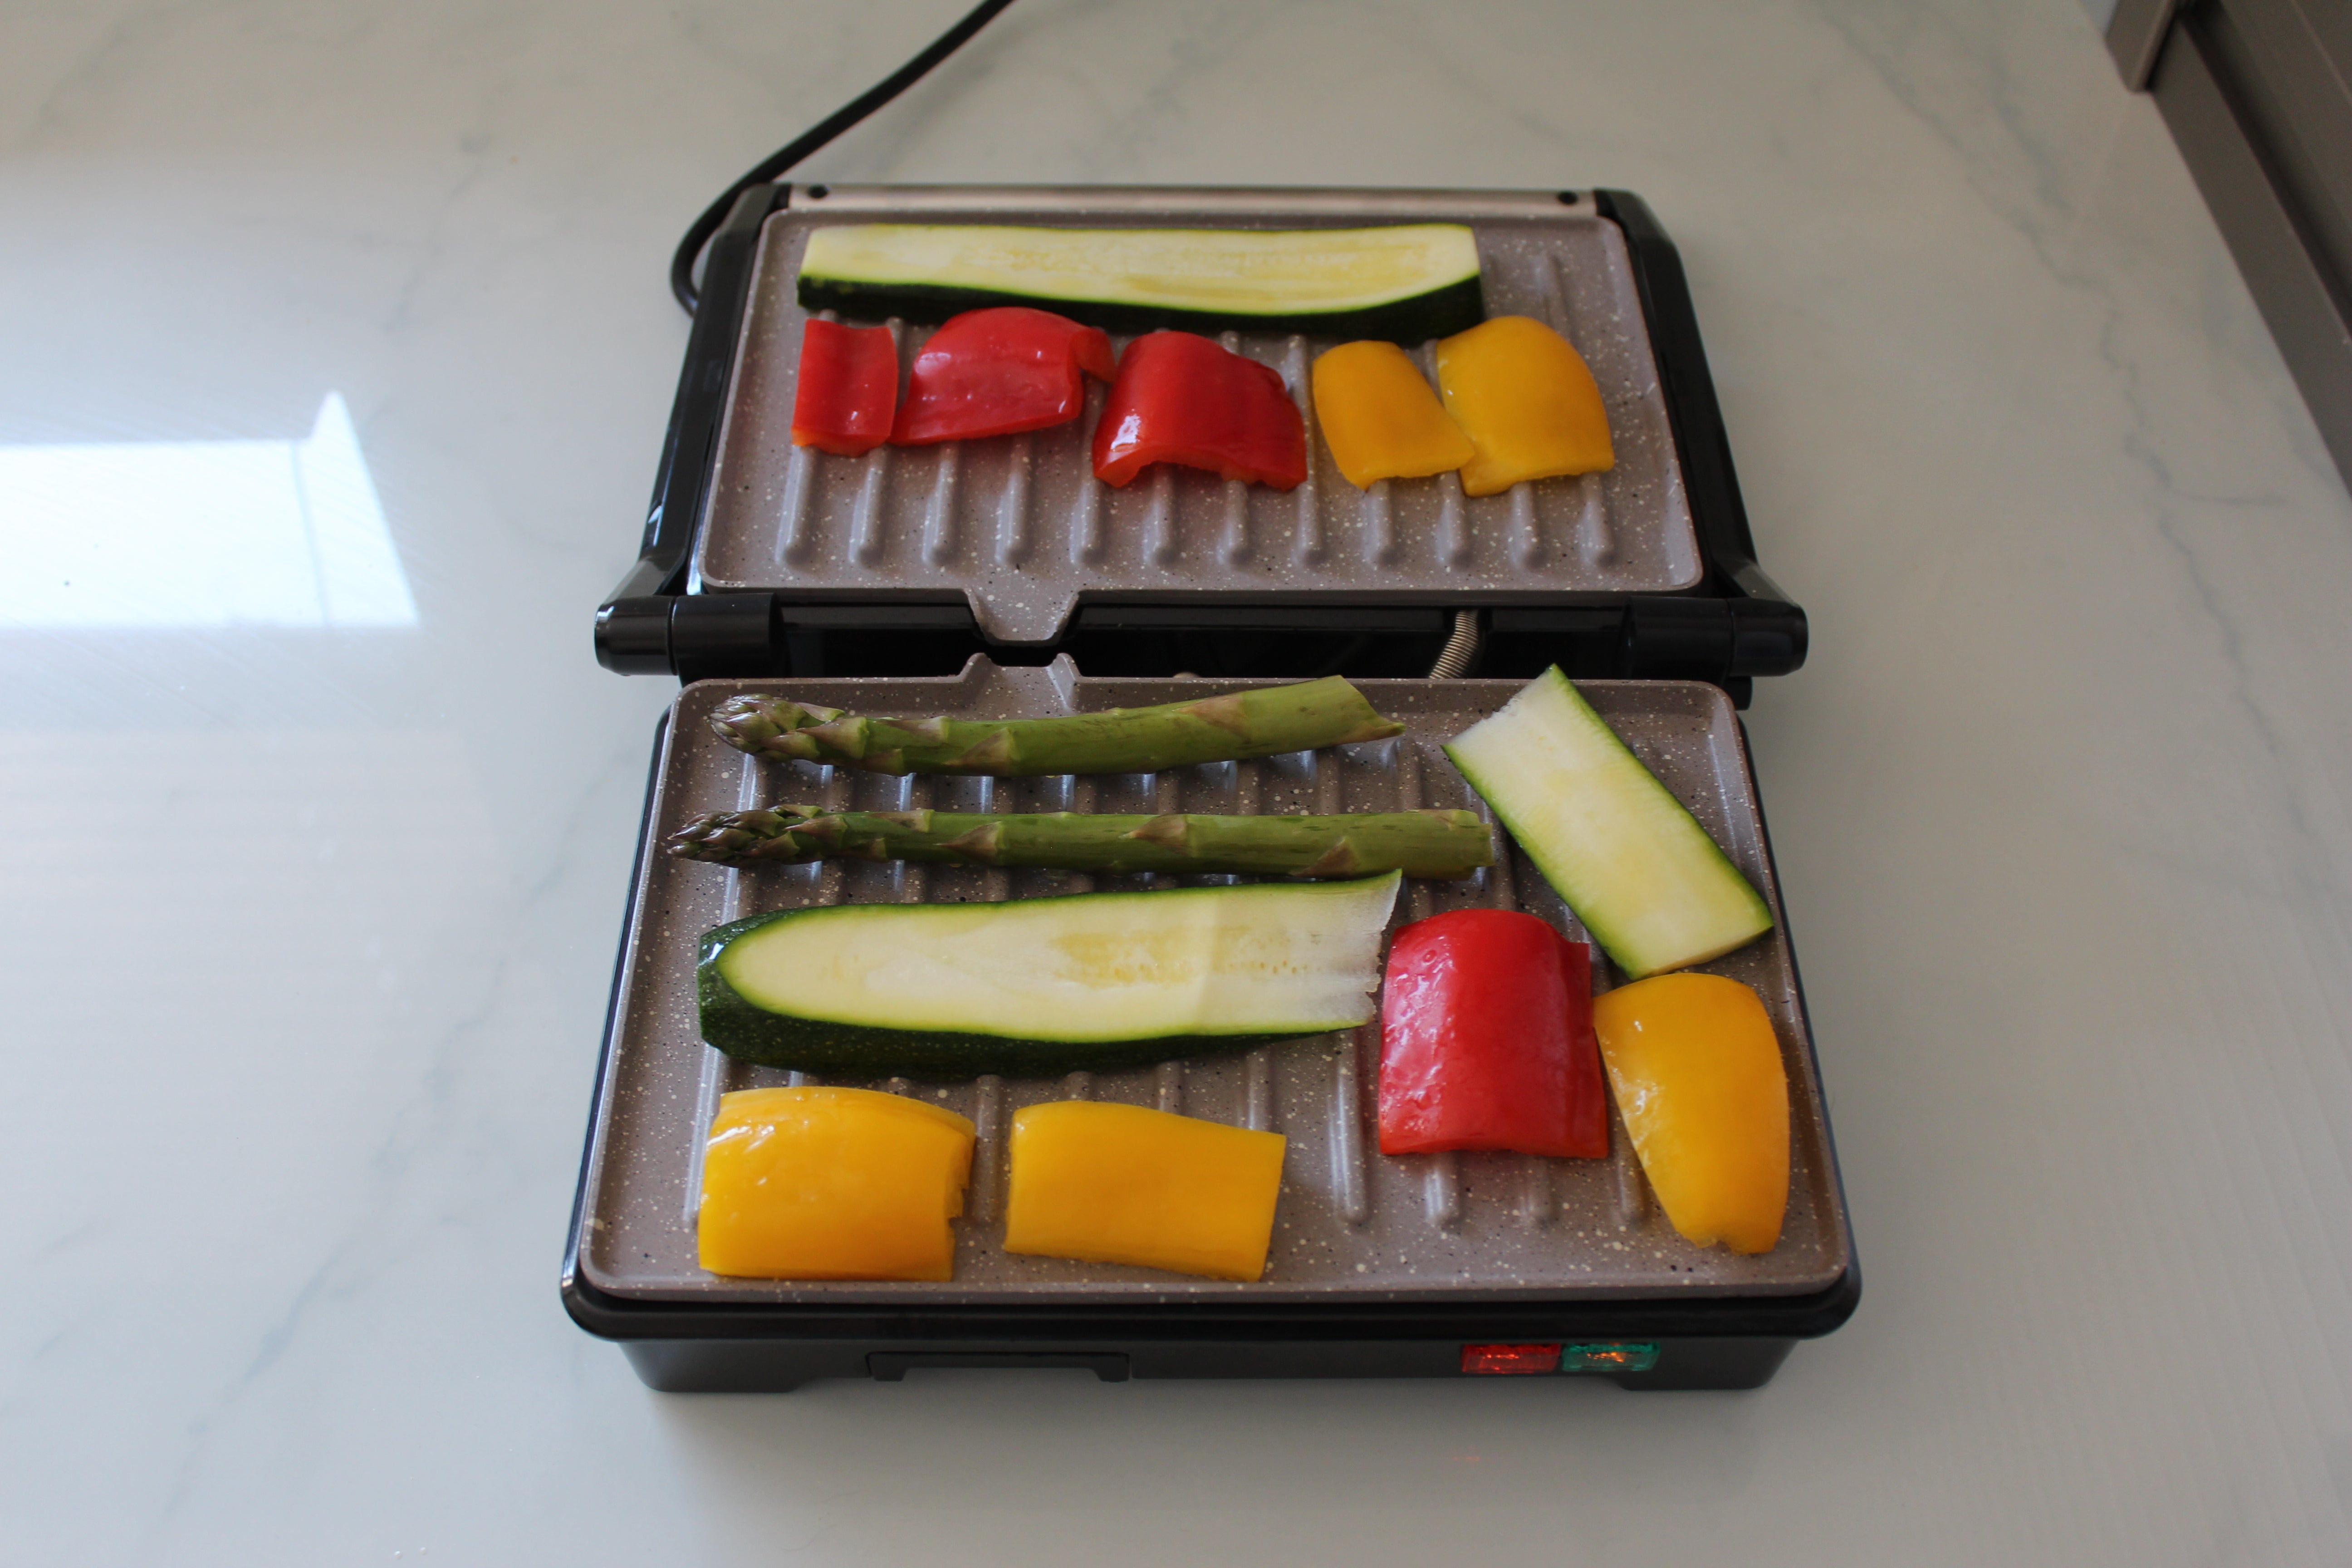 Weight Watchers grill with vegetables cooking on it.